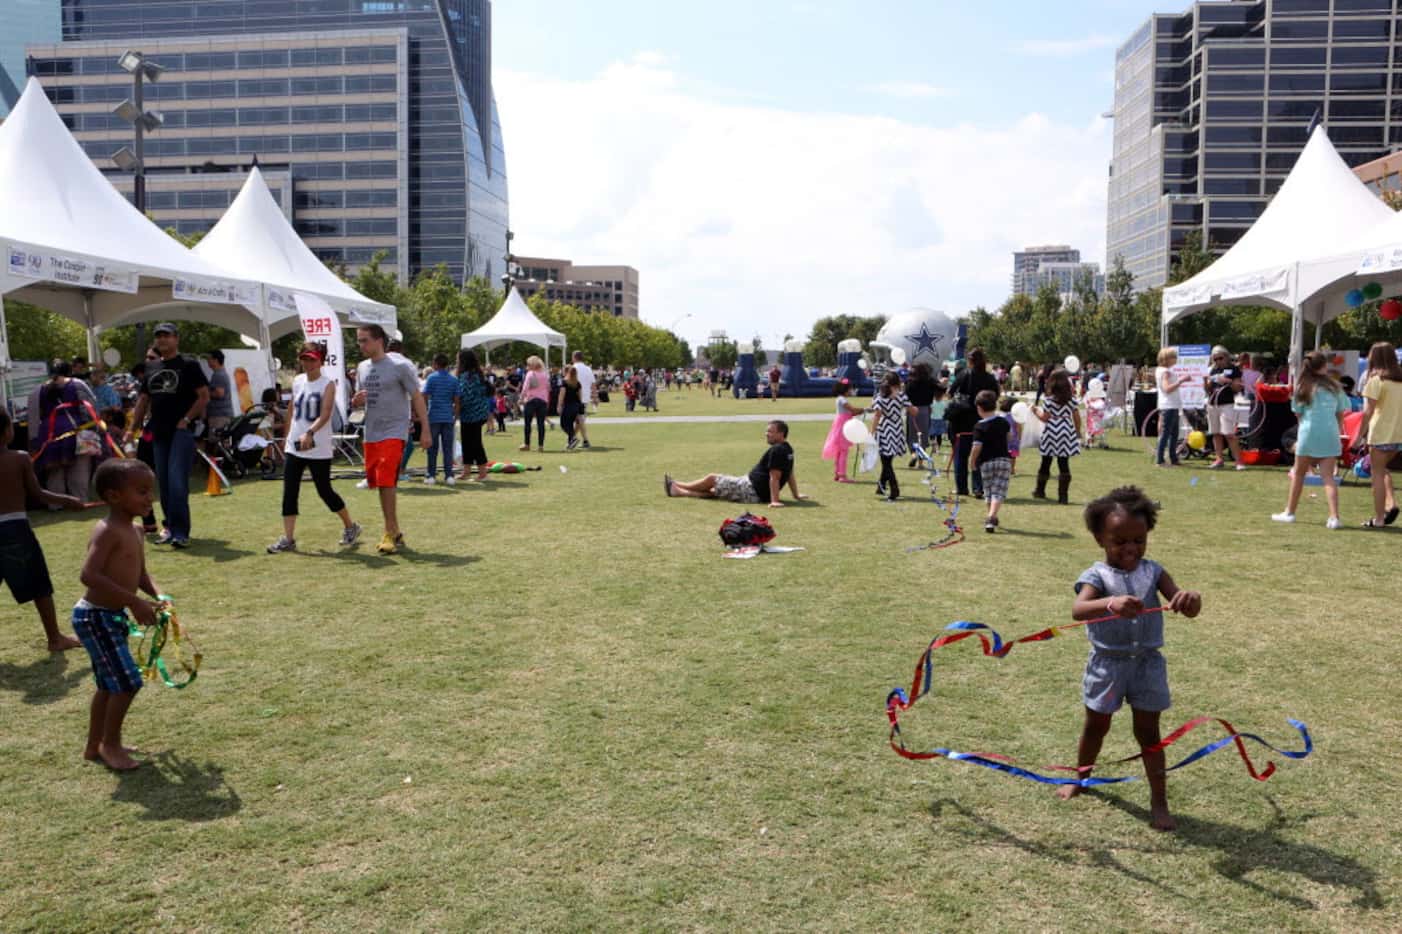 Kylde Warren Park's opening has given Dallas an outdoor space big enough to accommodate...